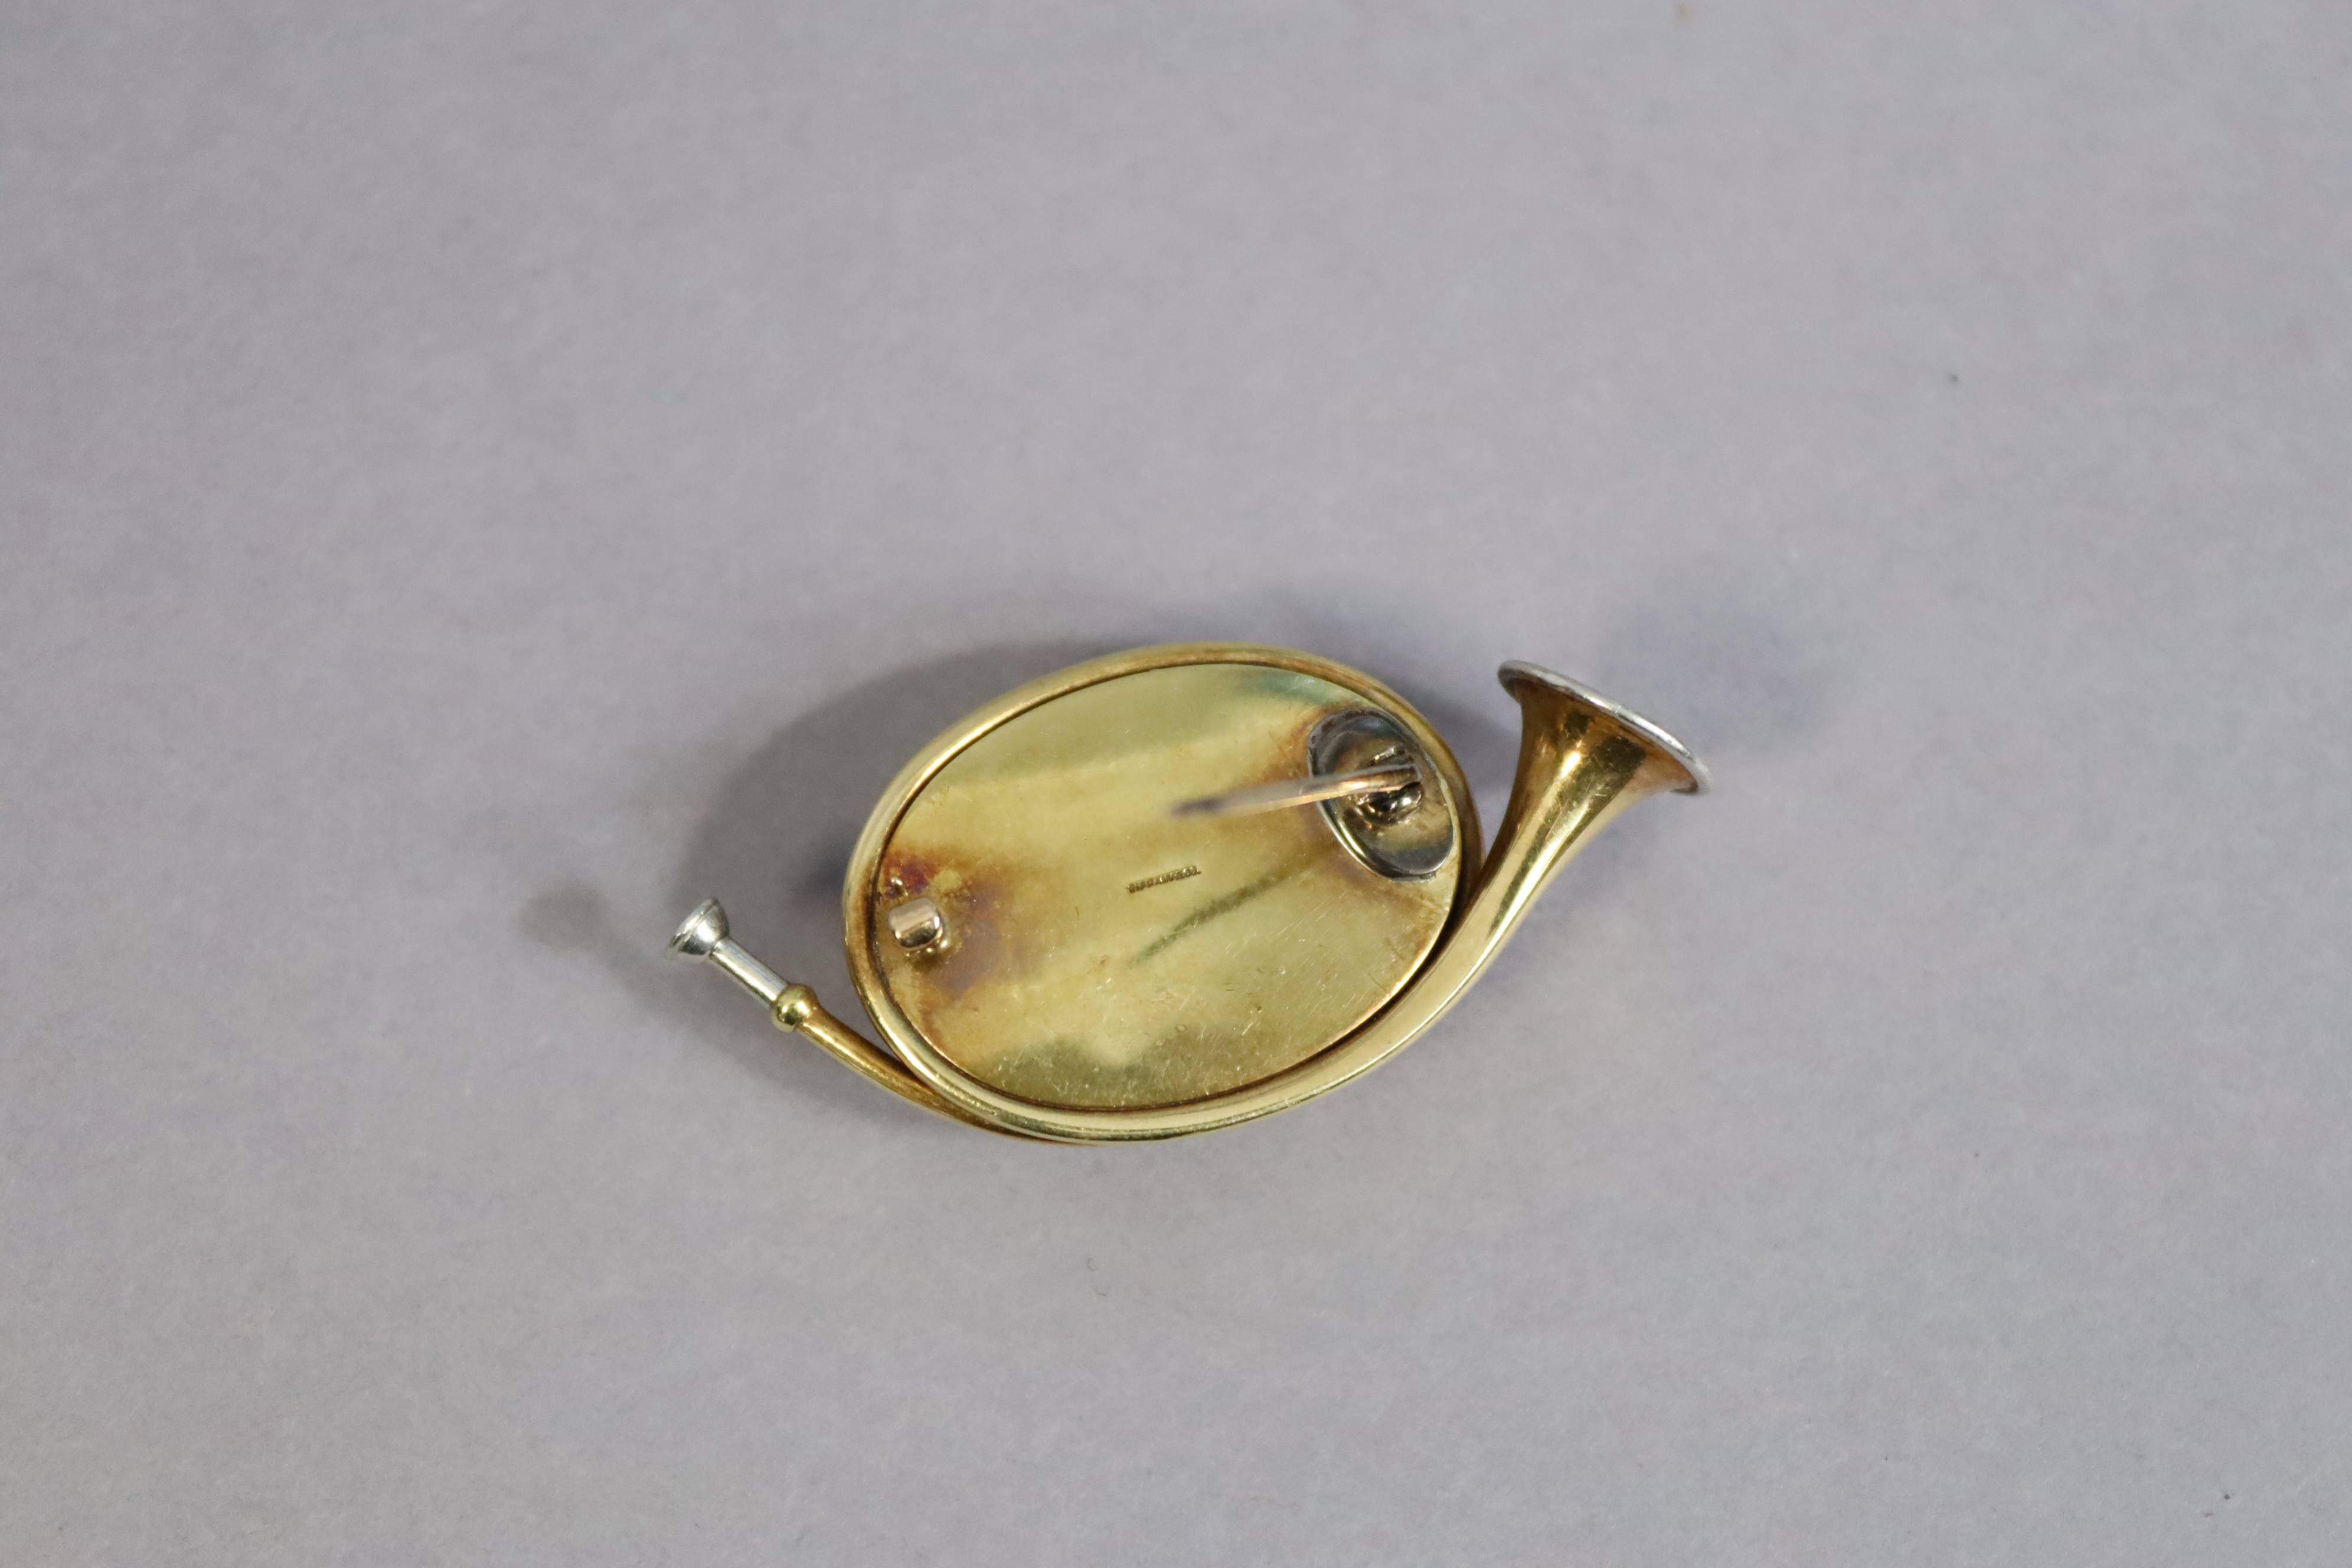 A Tiffany & Co yellow & white-metal novelty hunting horn brooch inset with Essex crystal fox - Image 4 of 4